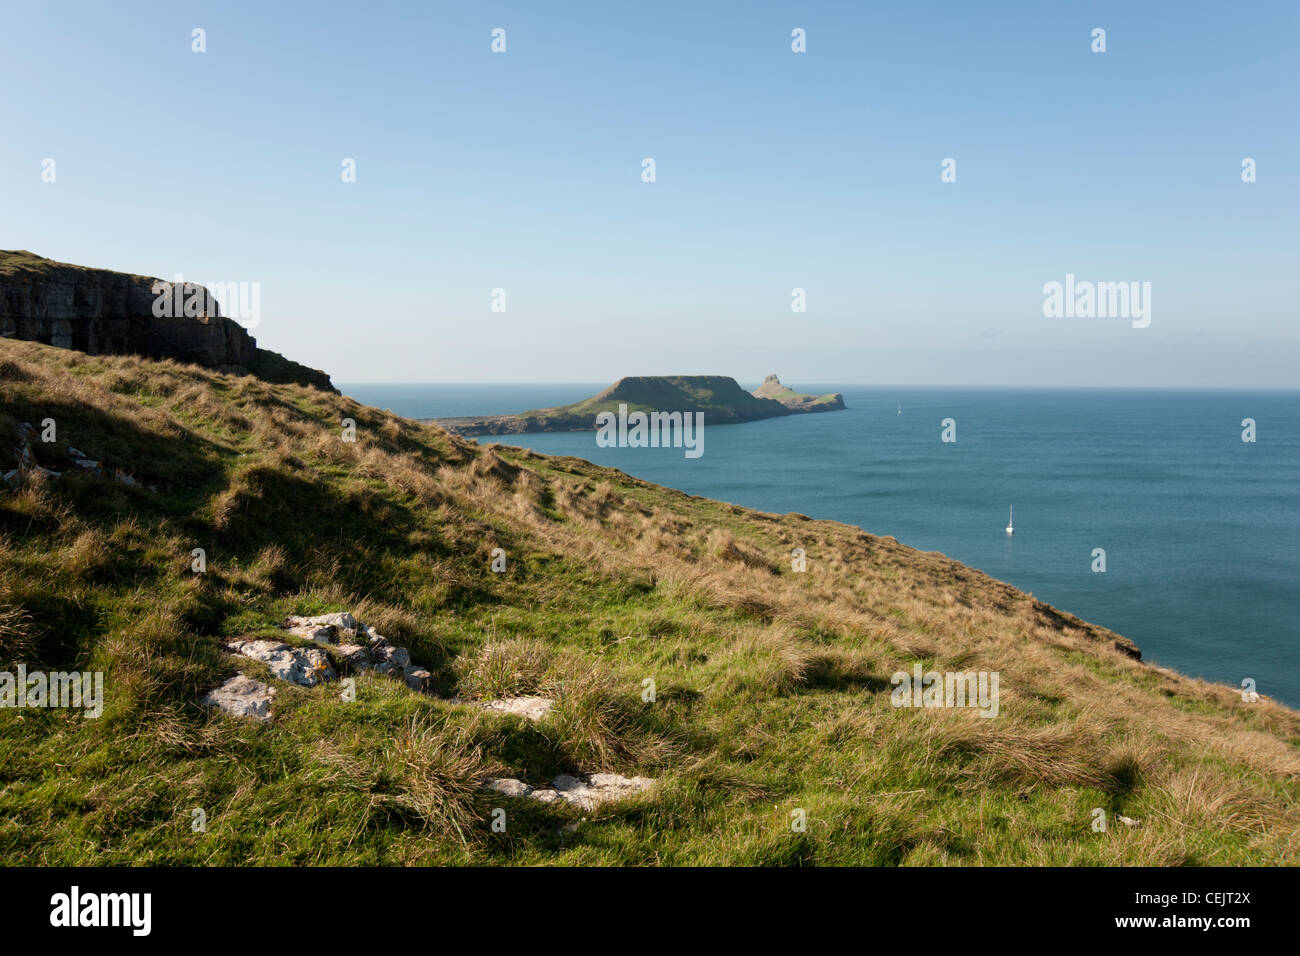 A view towards worms head, Rhossili Bay, Gower Peninsula, South Wales Stock Photo